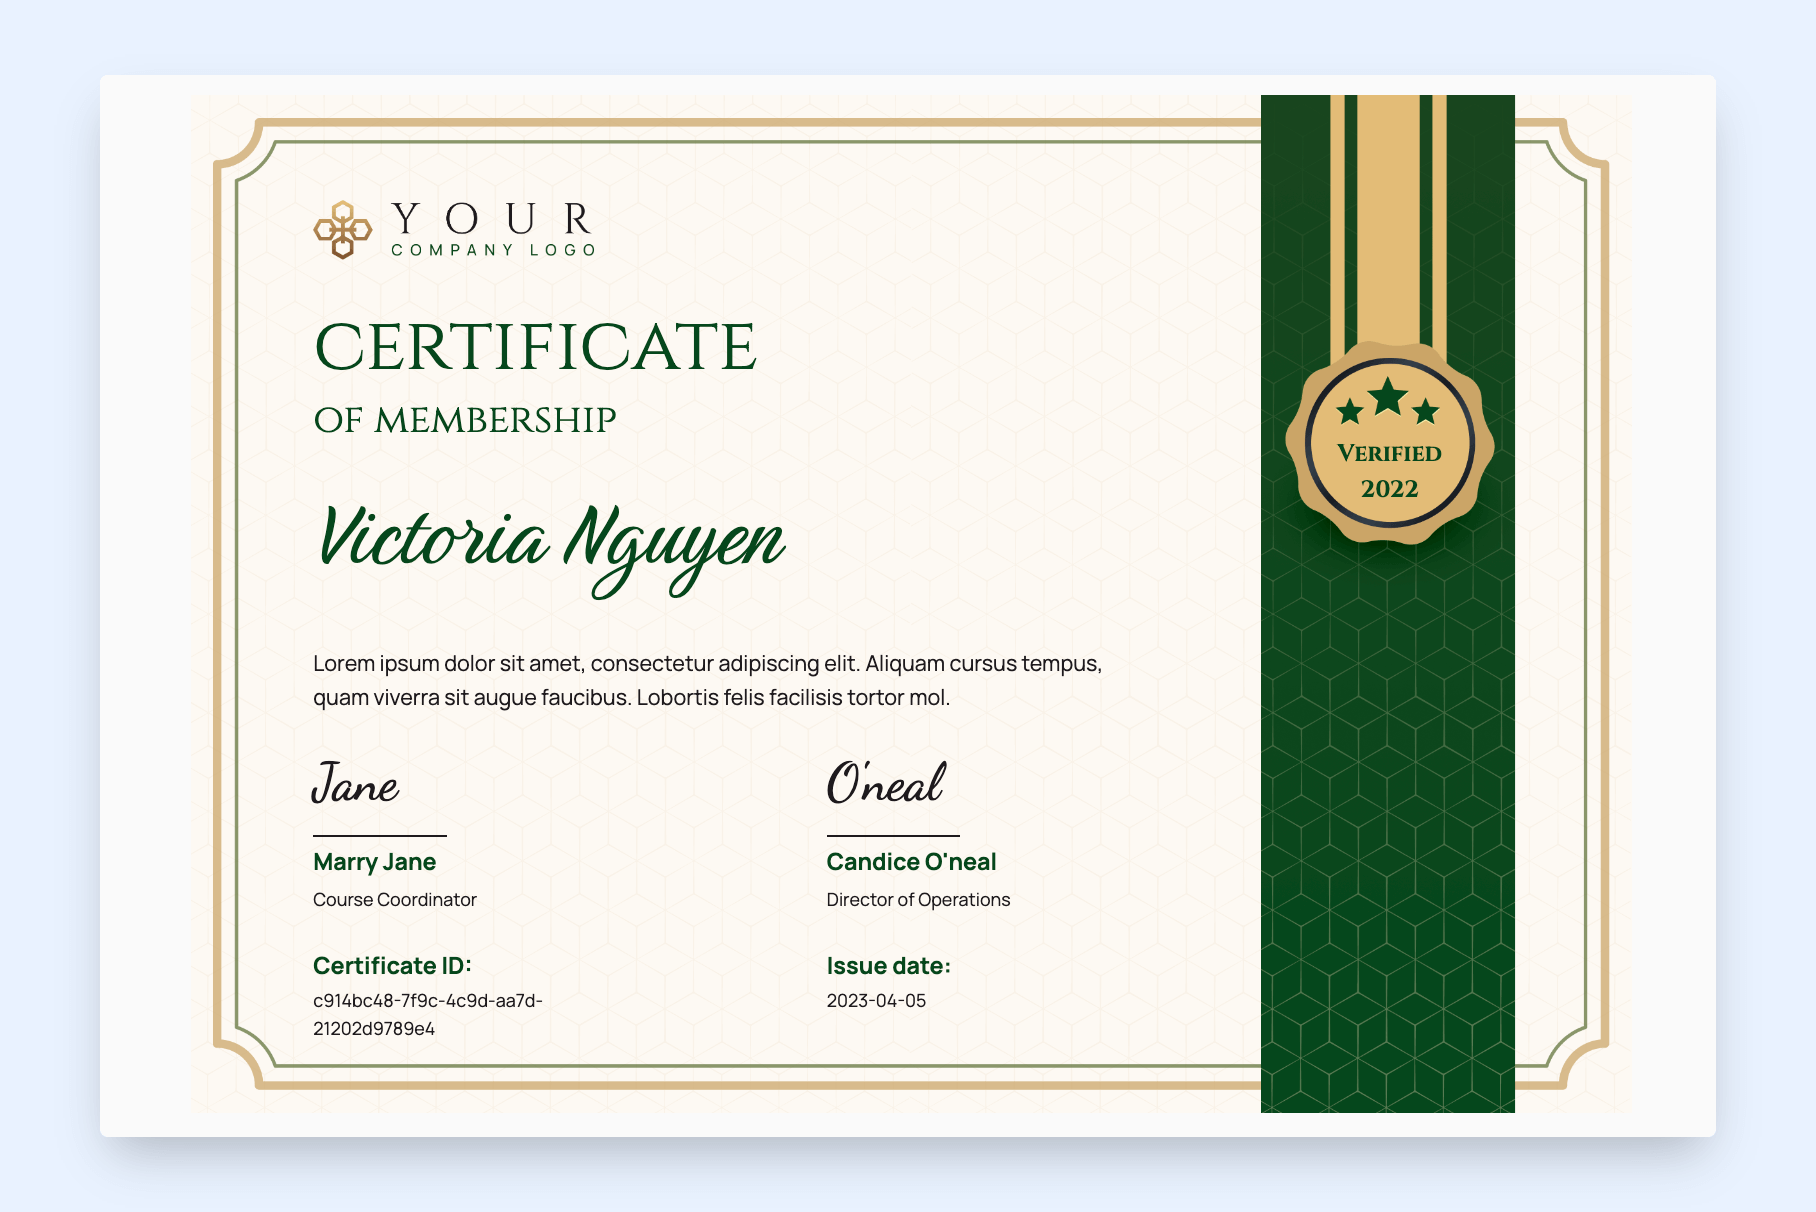 College-vibe certificate of membership with gold badge.